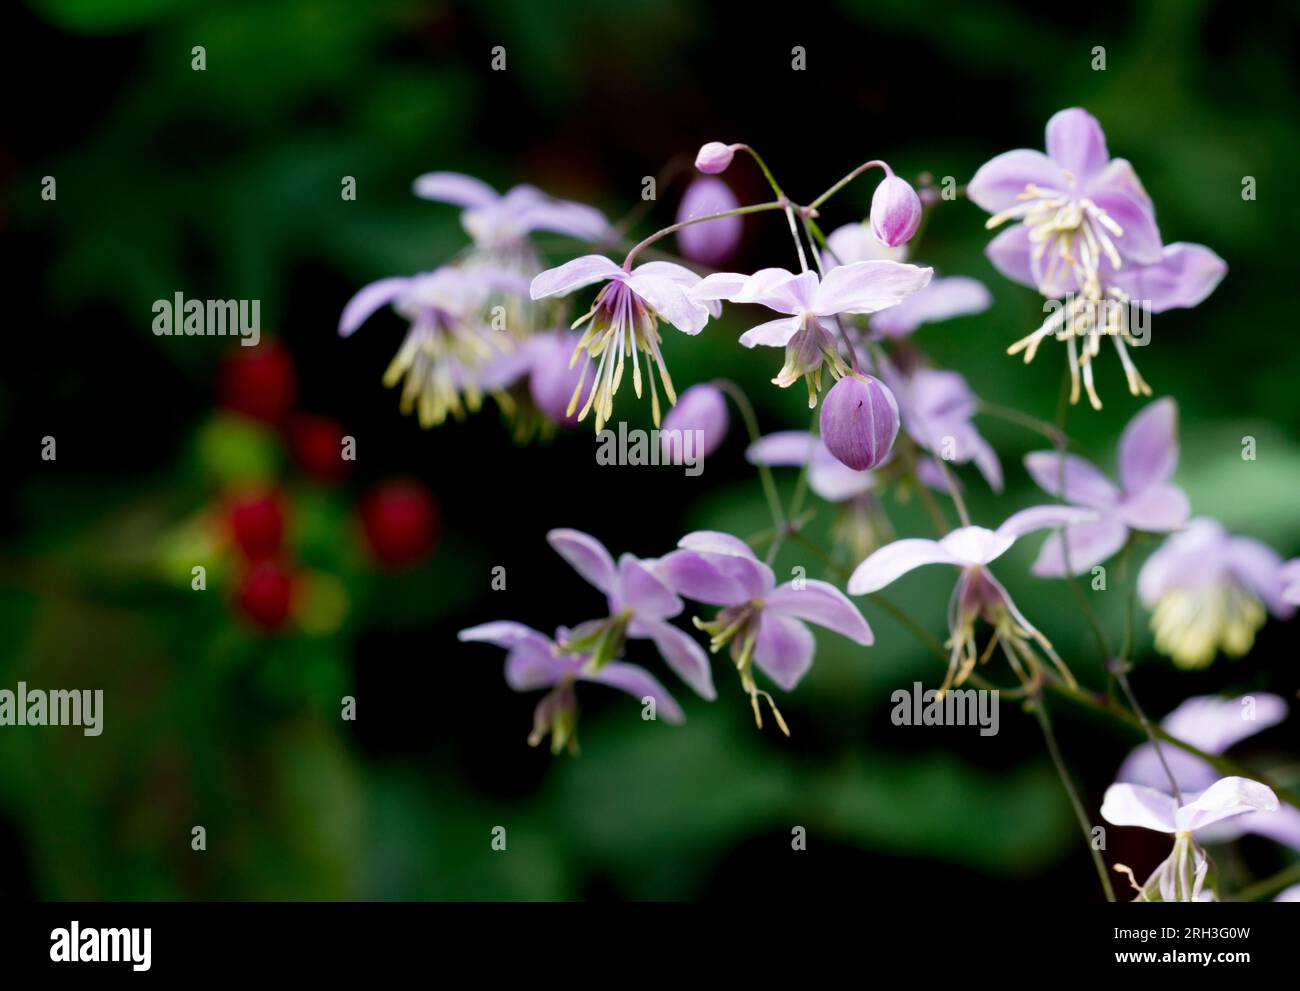 Thalictrum delavayi, Chinese meadow-rue, is a species of flowering plant in the family Ranunculaceae native to China, with lilac flowers. Stock Photo